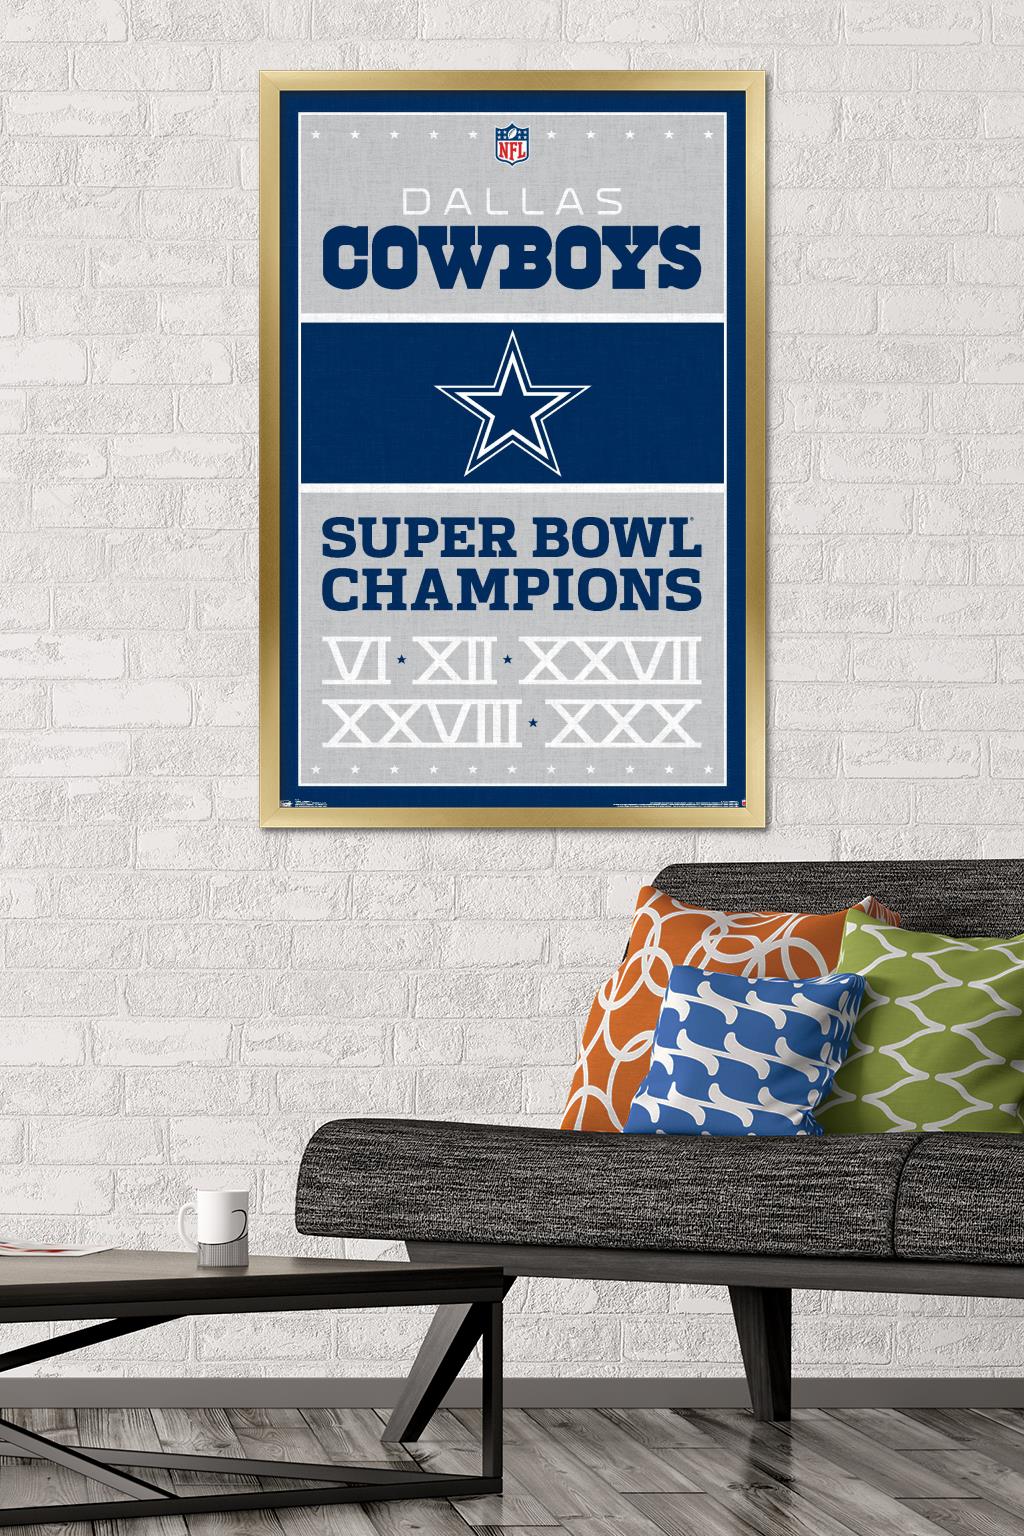 NFL Dallas Cowboys - Champions 13 Wall Poster, 22.375" x 34", Framed - image 2 of 6